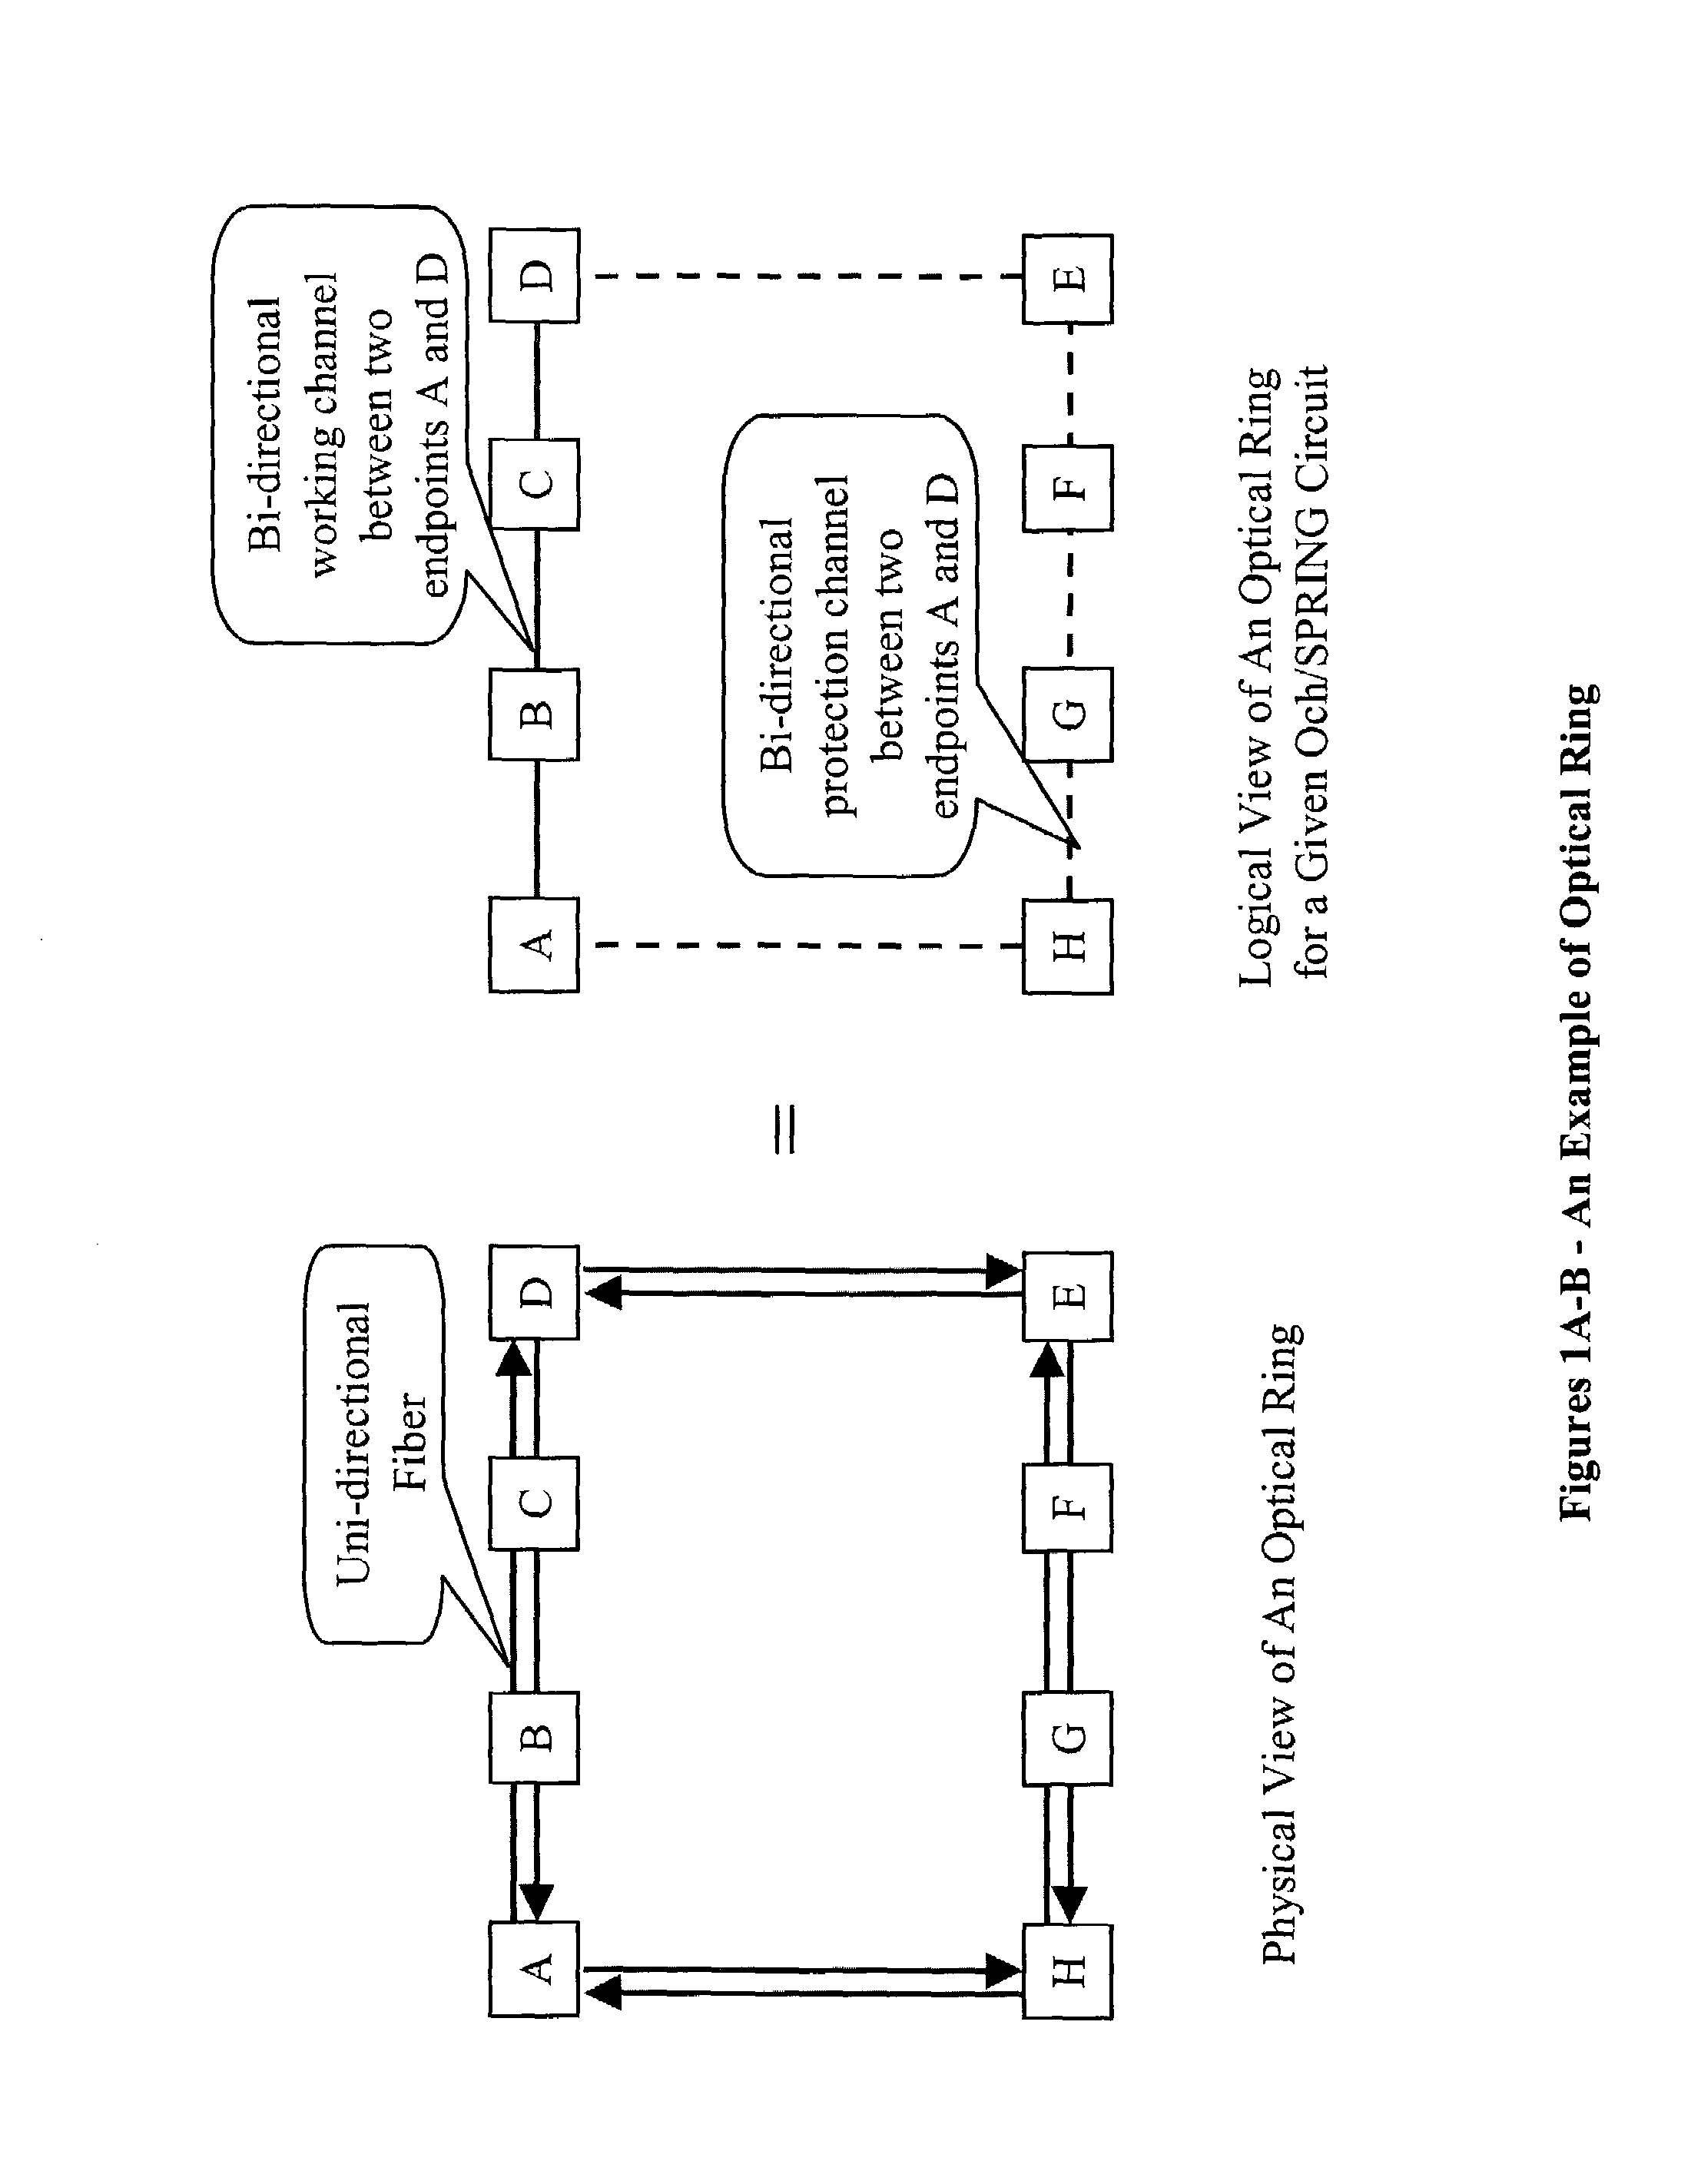 Optical automatic protection switching mechanism for optical channel shared protection rings